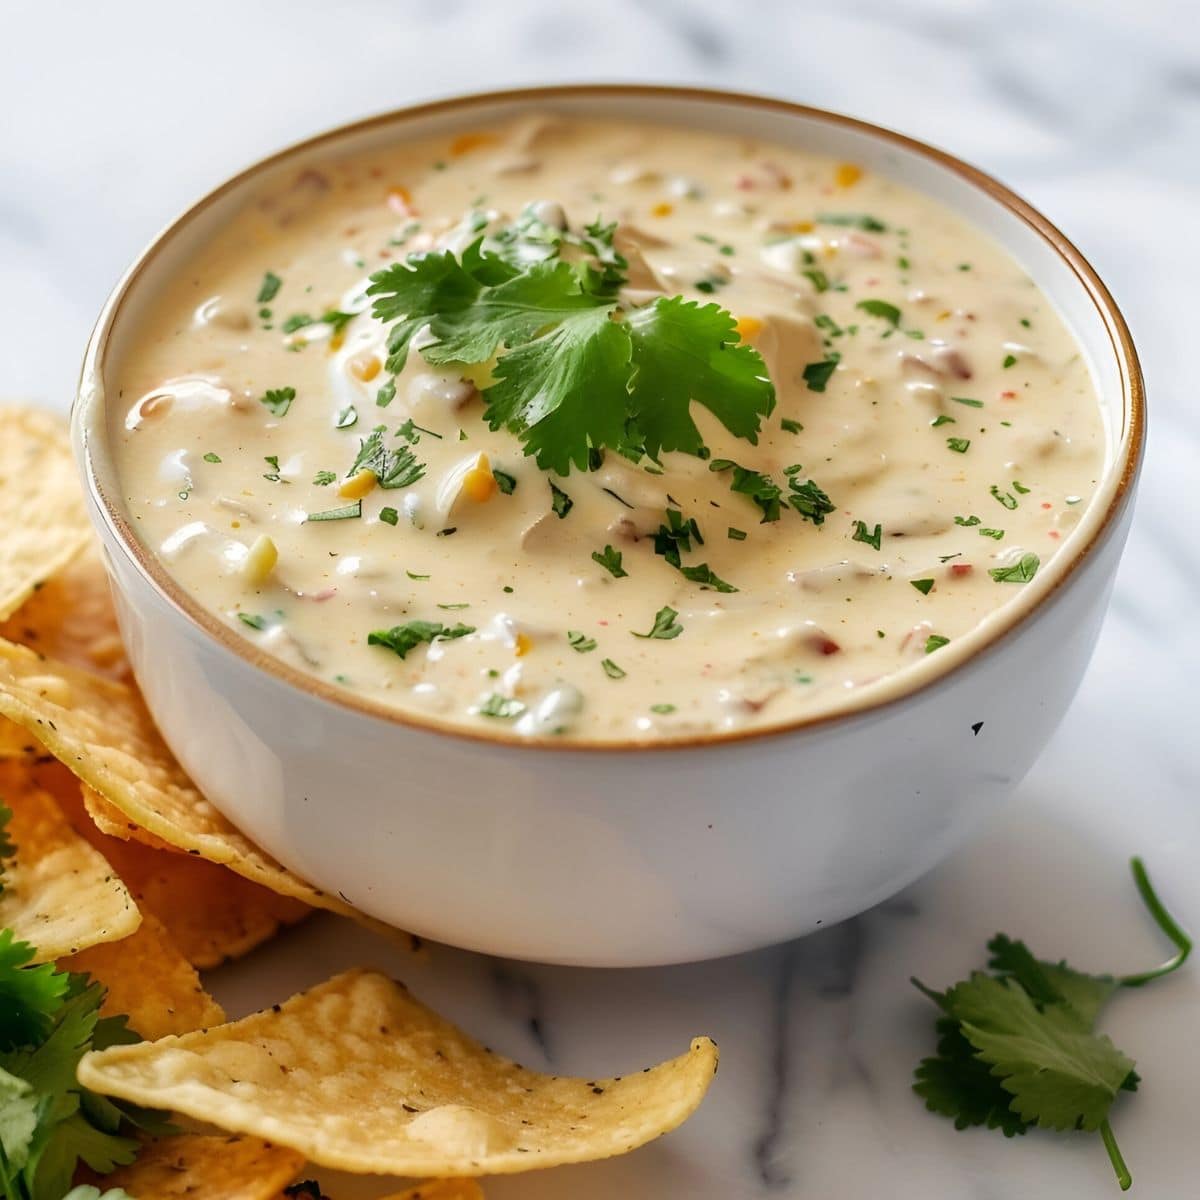 Top Side View of a Bowl of Mexican White Queso Cheese Dip with Cilantro on a White Marble Table with Chips